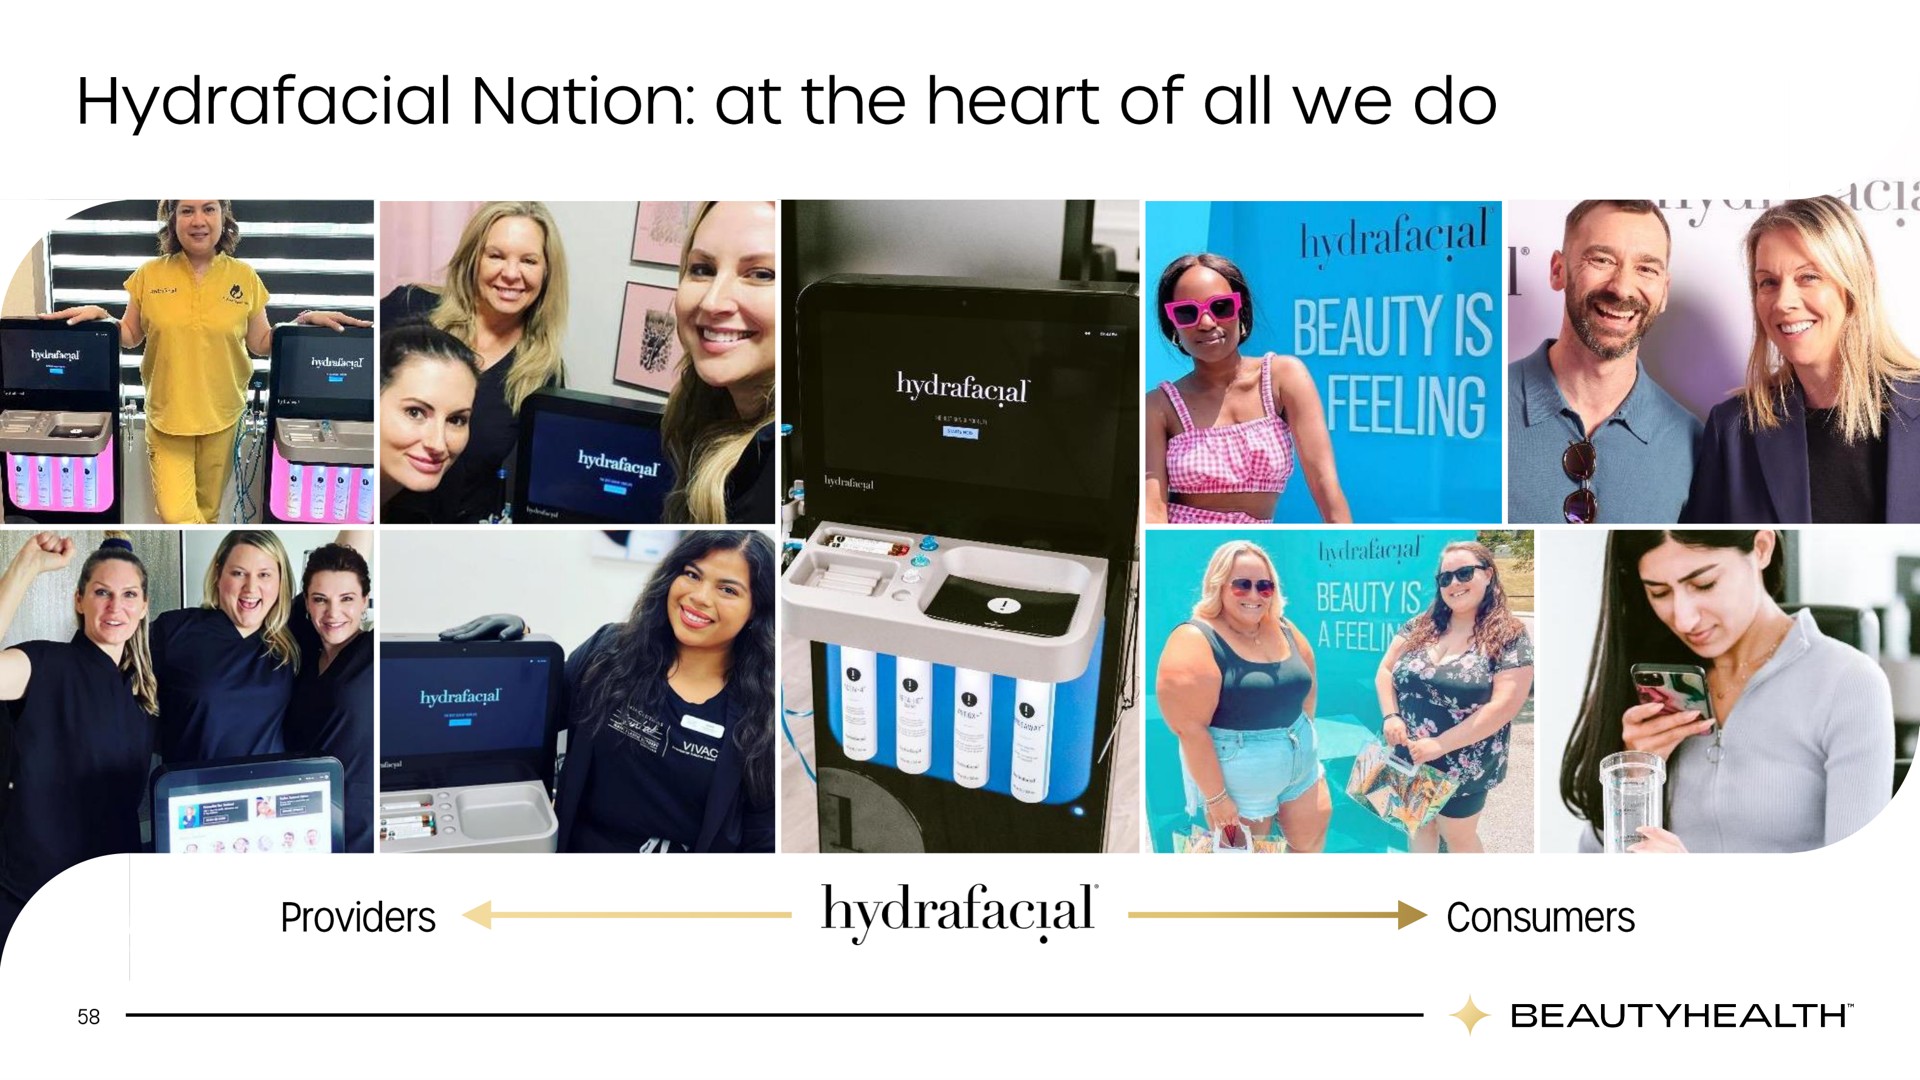 nation at the heart of all we do | Hydrafacial